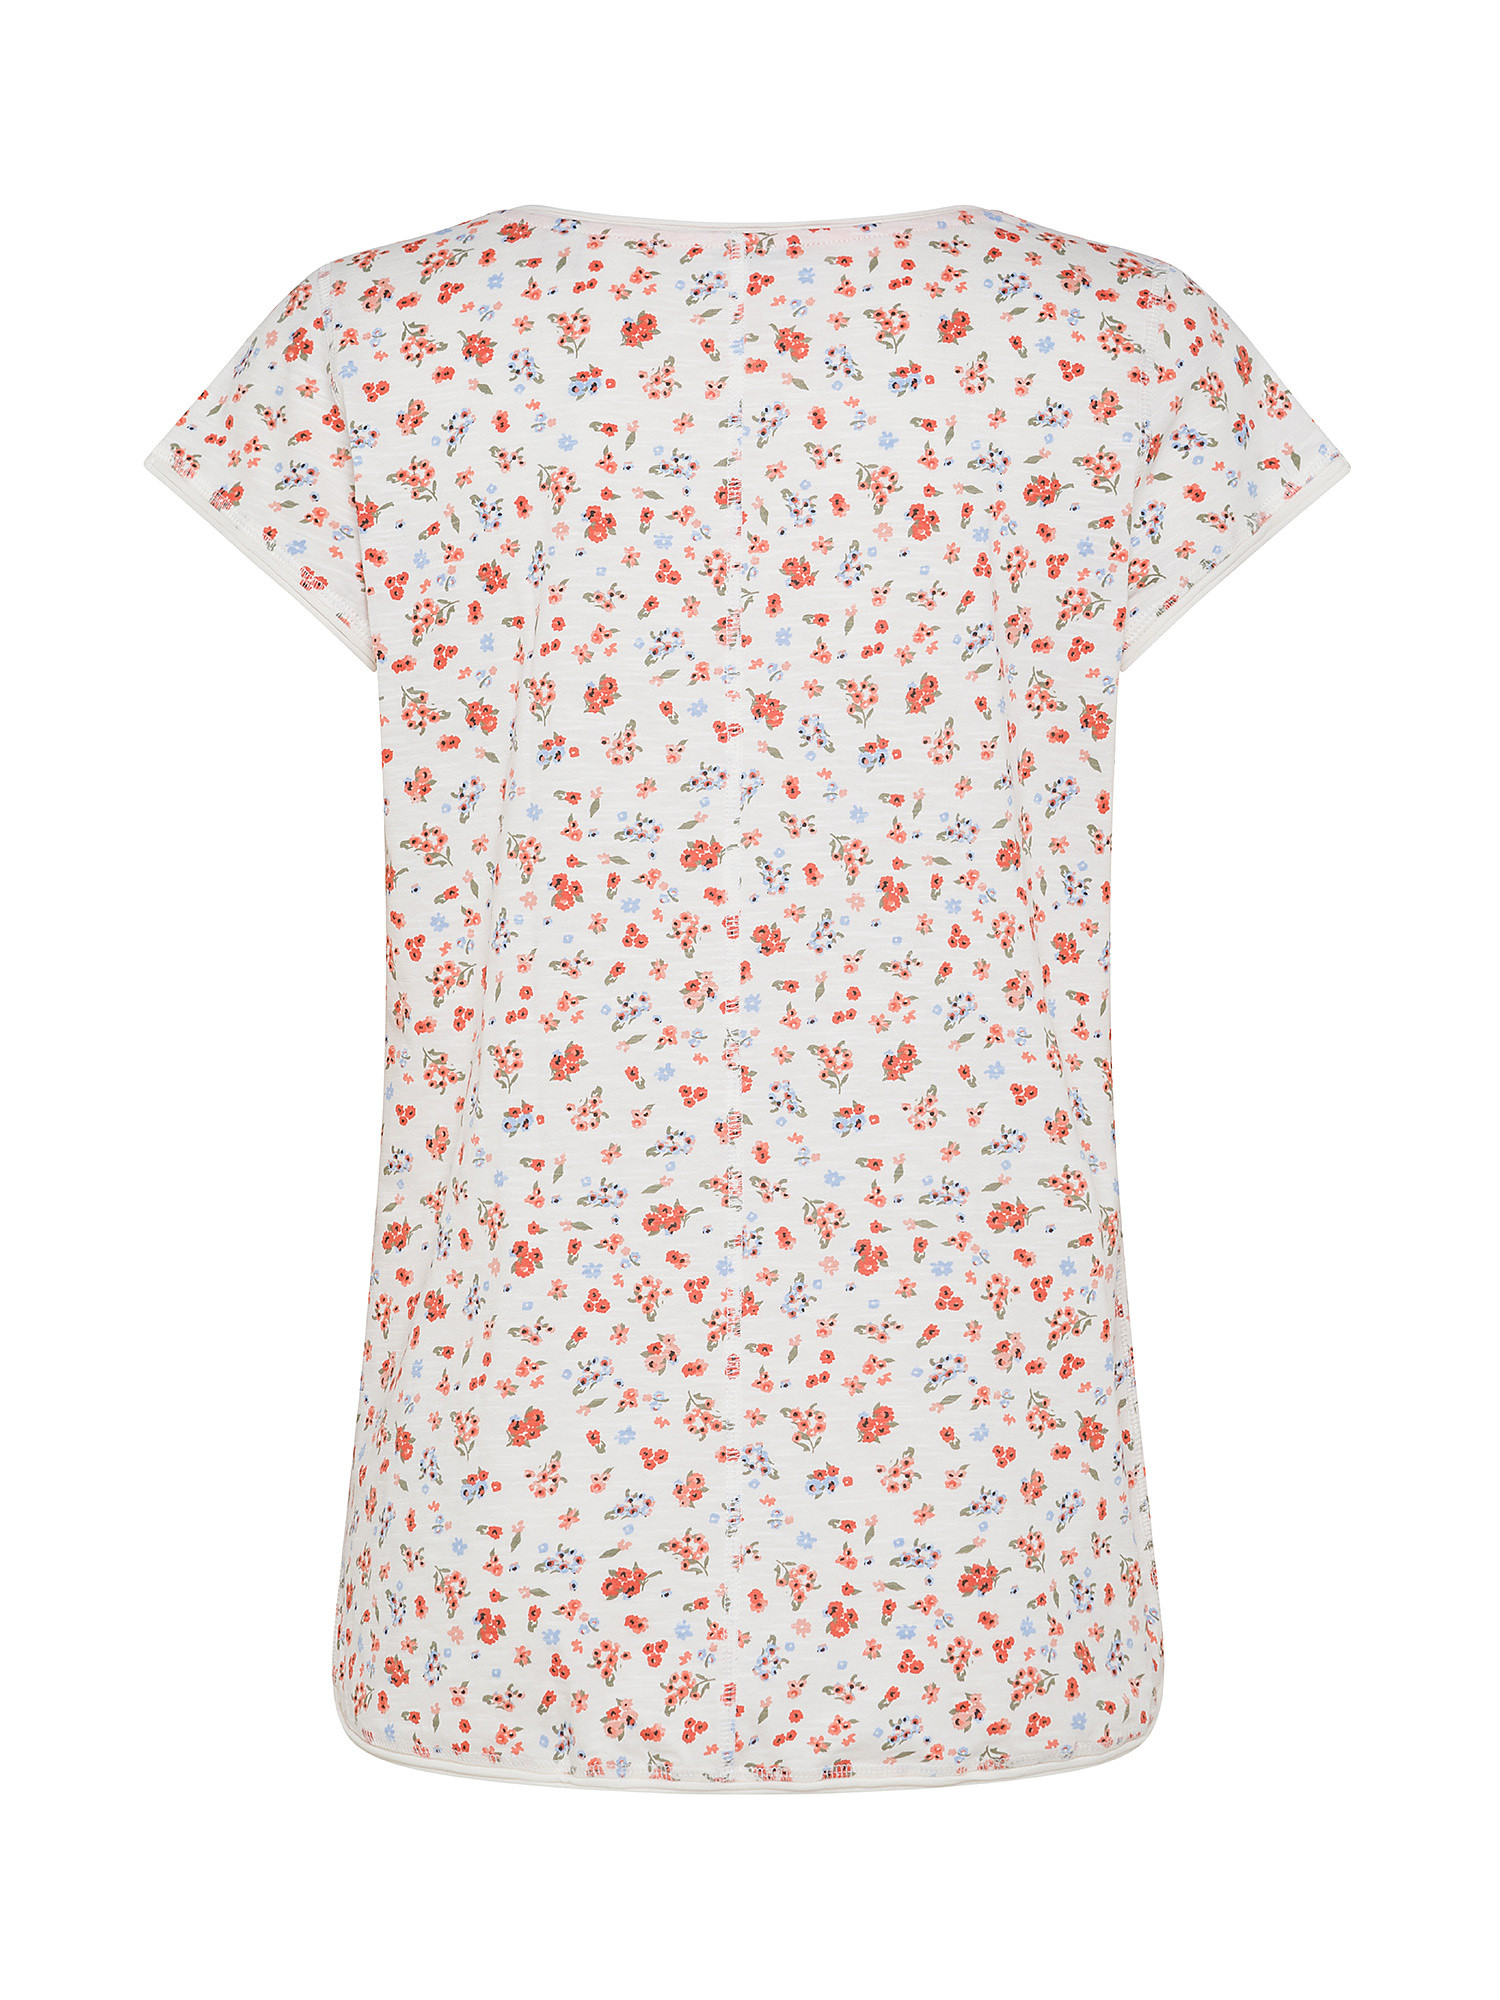 Esprit - Cotton T-shirt with all over print, White, large image number 1